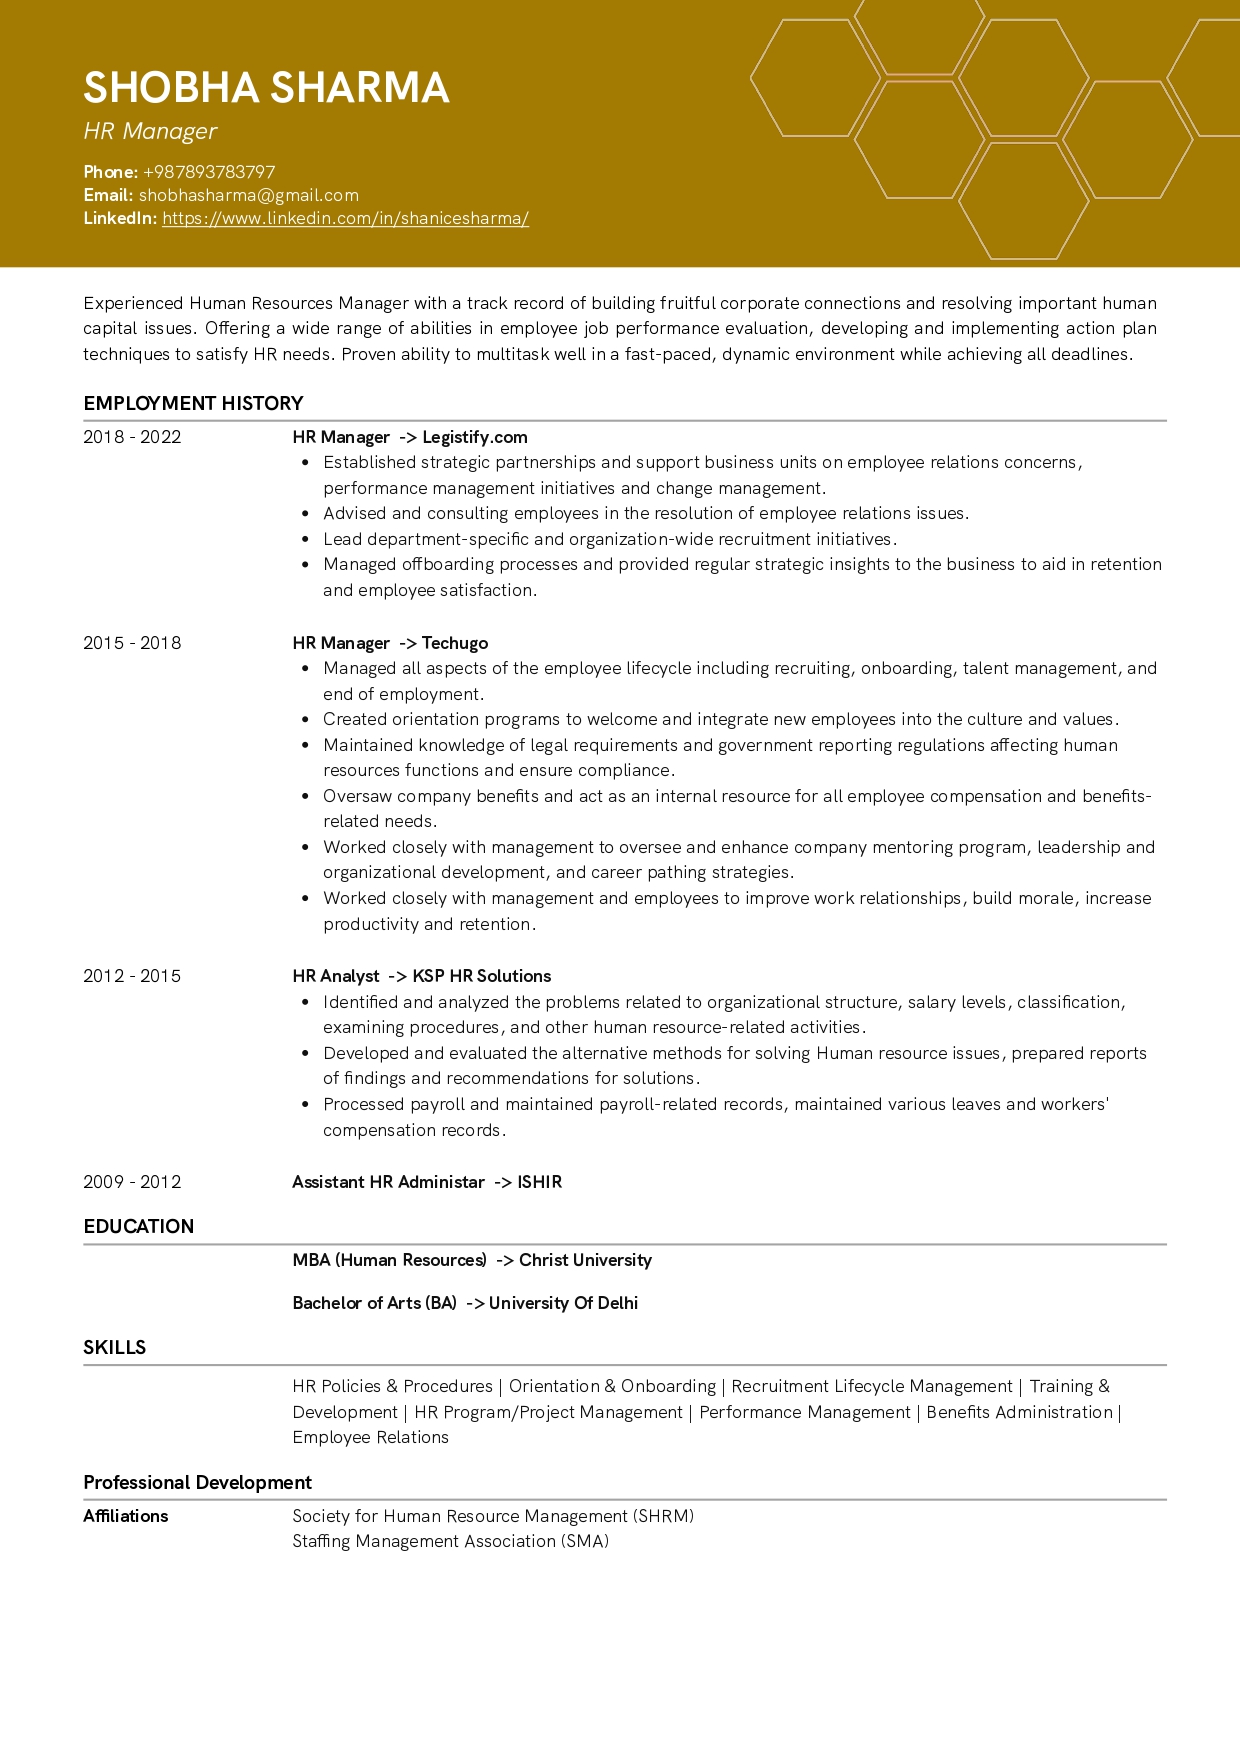 Sample Resume of HR Manager | Free Resume Templates & Samples on Resumod.co